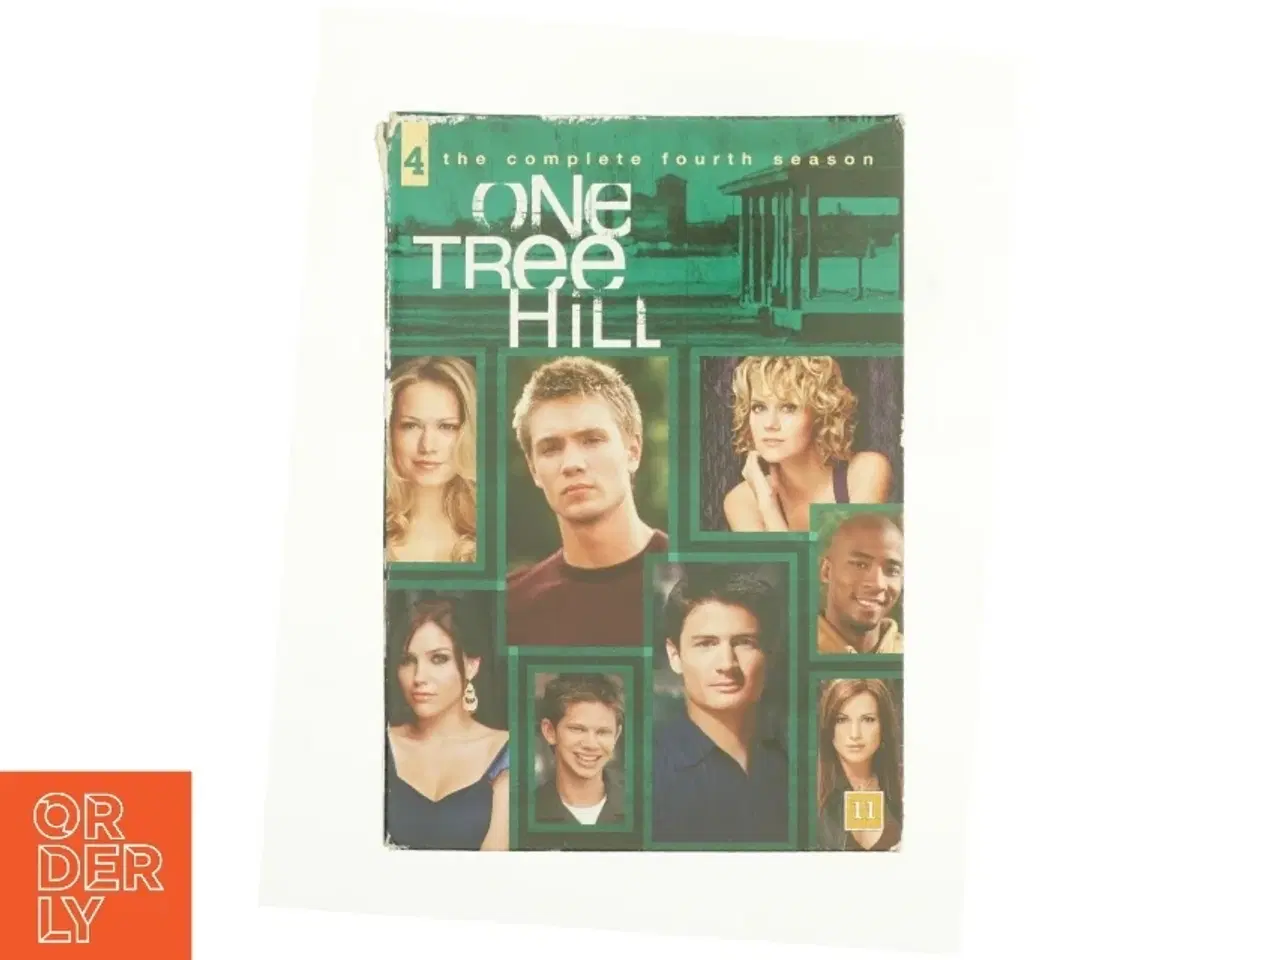 Billede 1 - One Tree Hill - the Complete Fourth Season fra DVD